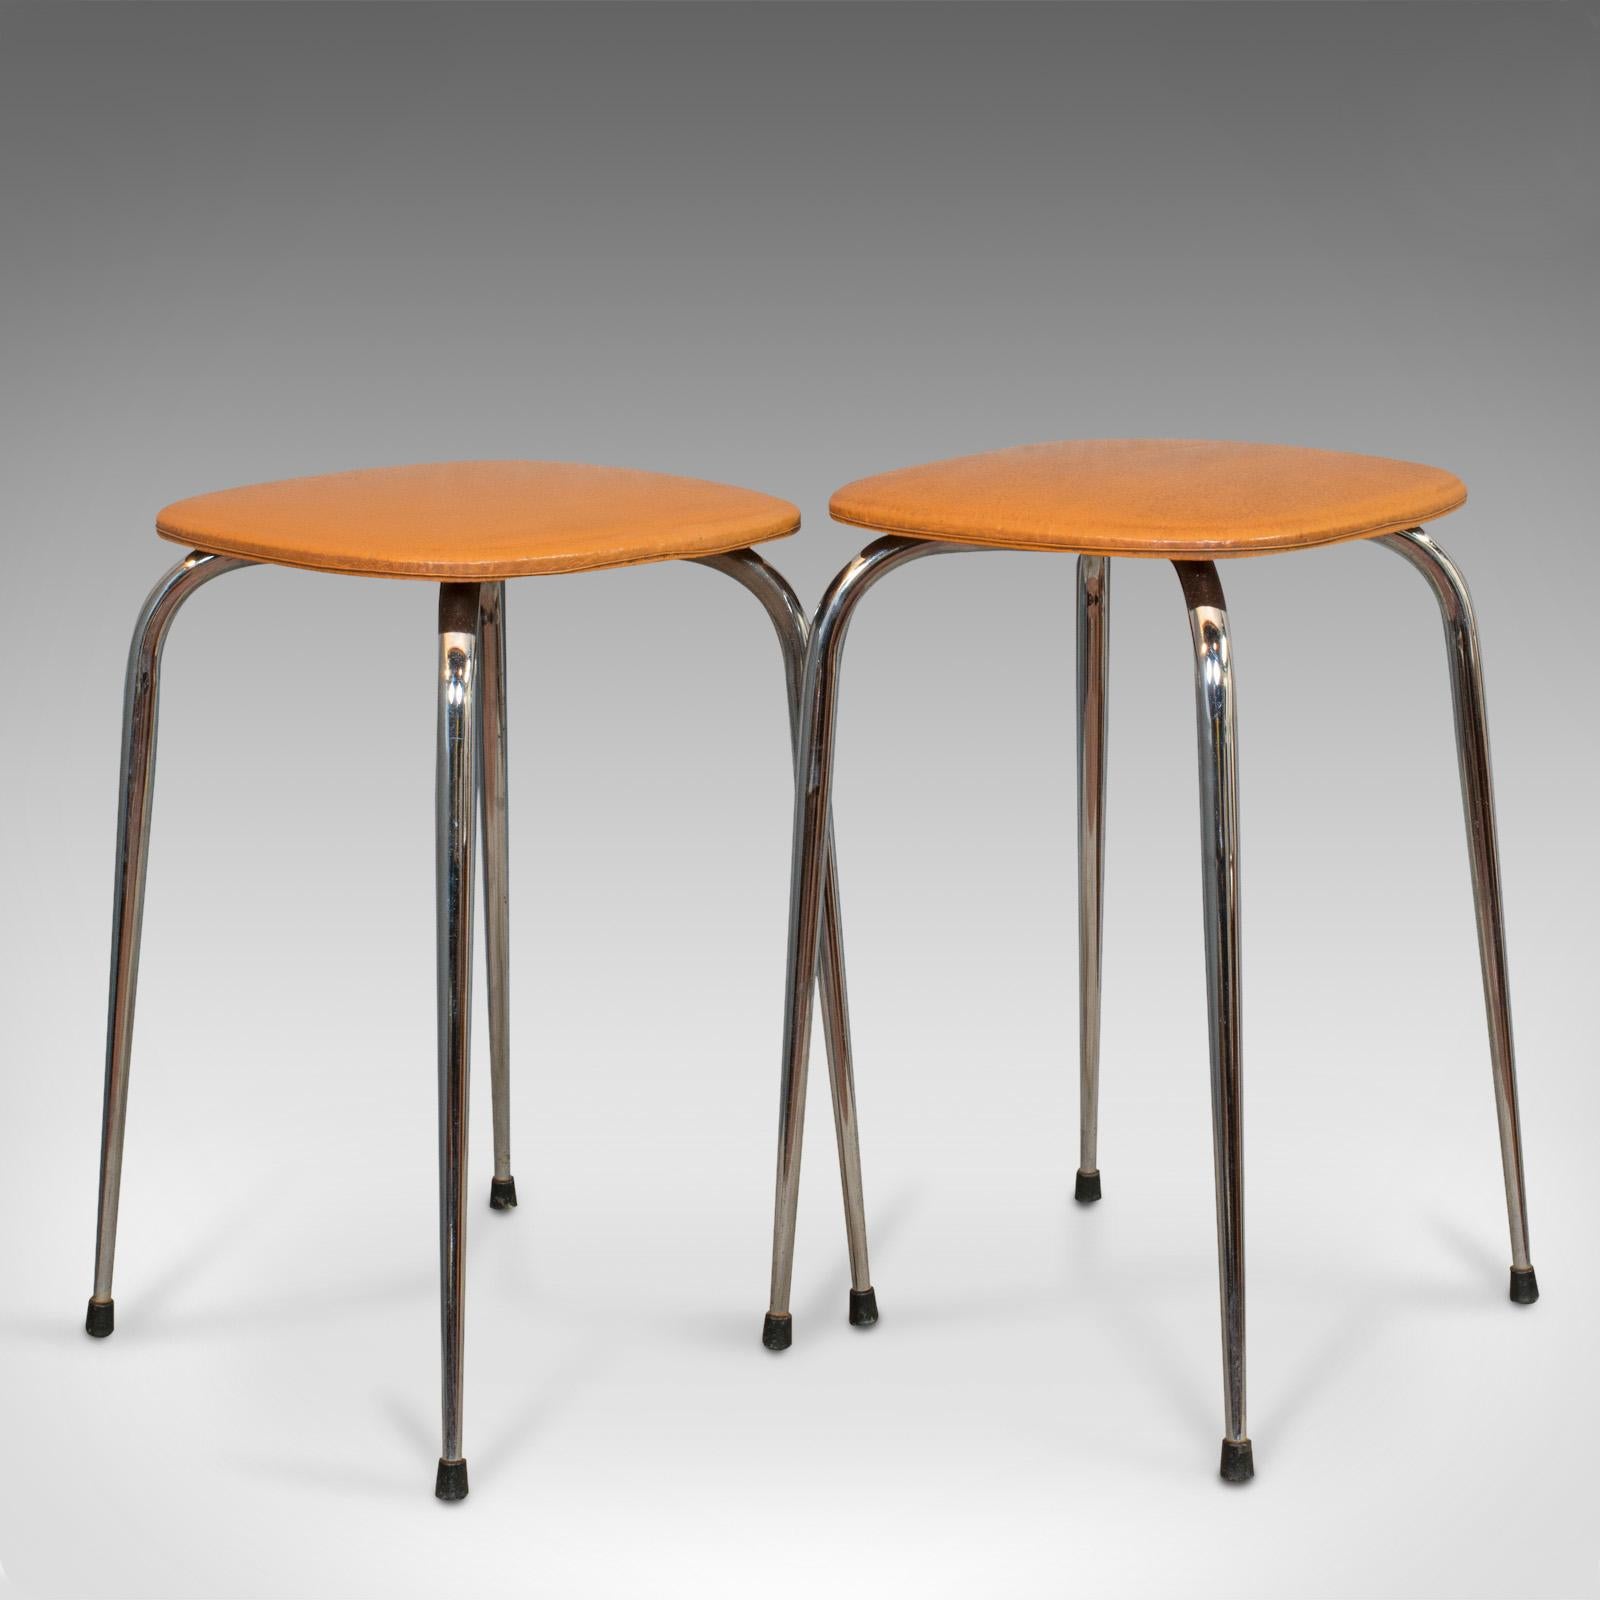 Mid-Century Modern Pair of Vintage Lounge Stools, French, Leatherette, 1960s Stool, 20th Century For Sale